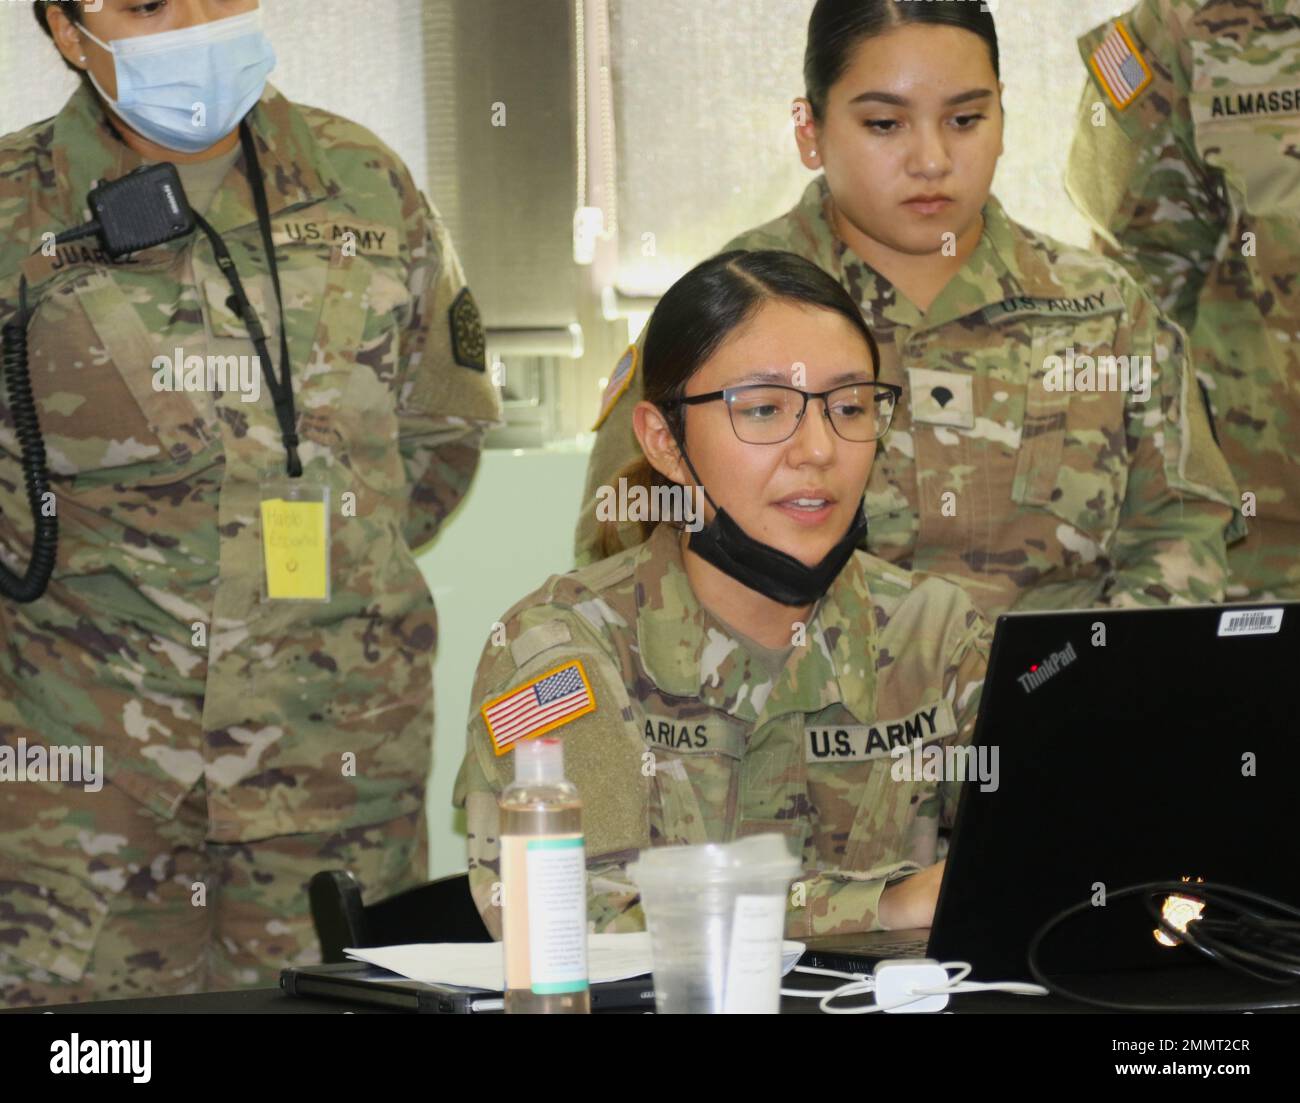 Spc. Linda Arias of Chicago, a member the Illinois Army National Guard's North Riverside, Ill.-based 1970th Quartermaster Co. instructs her fellow Soldiers on a new computer system at a site housing asylum seekers in Chicago. Governor JB Pritzker issued an emergency disaster proclamation on Sept. 14 and activated approximately 75 members of the Illinois National Guard to ensure all state resources are available to support asylum seekers arriving nearly daily to Chicago. The proclamation enables the Illinois Emergency Management Agency (IEMA) and other state agencies, in close coordination with Stock Photo